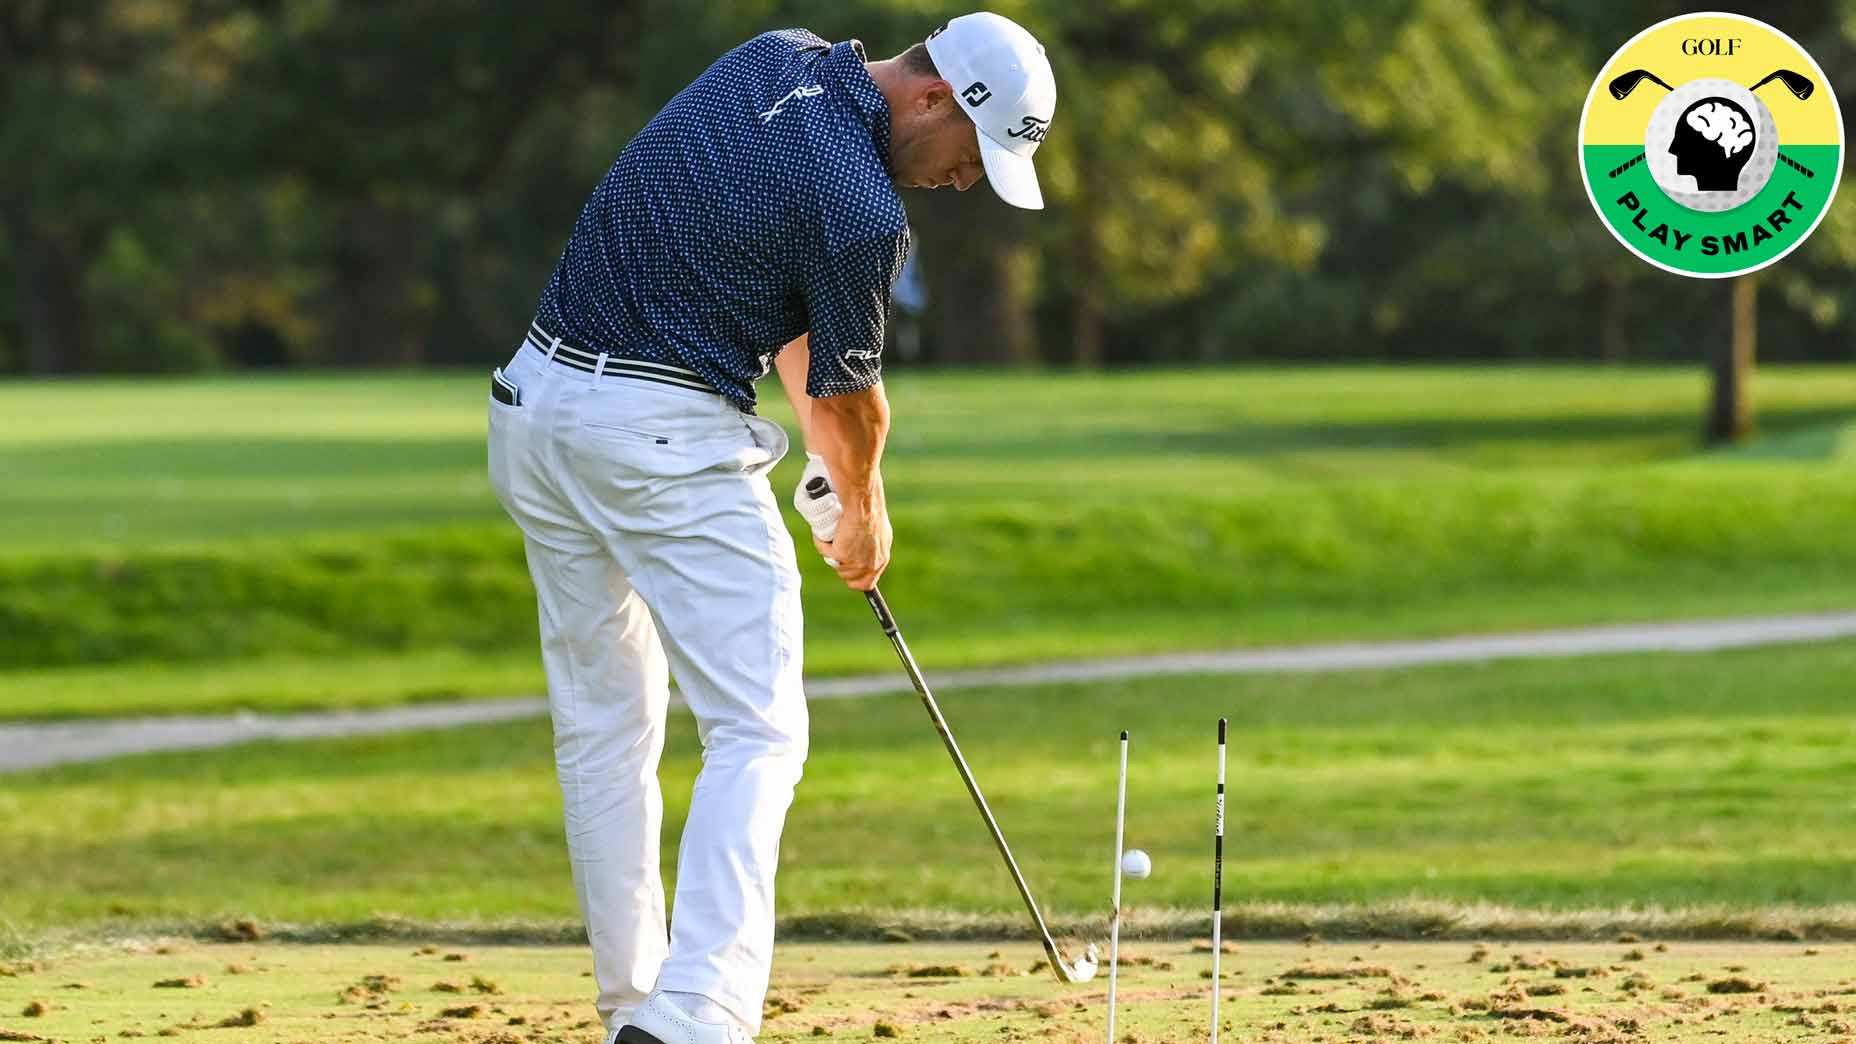 justin thomas hits golf balls on the range with alignment sticks in front of him